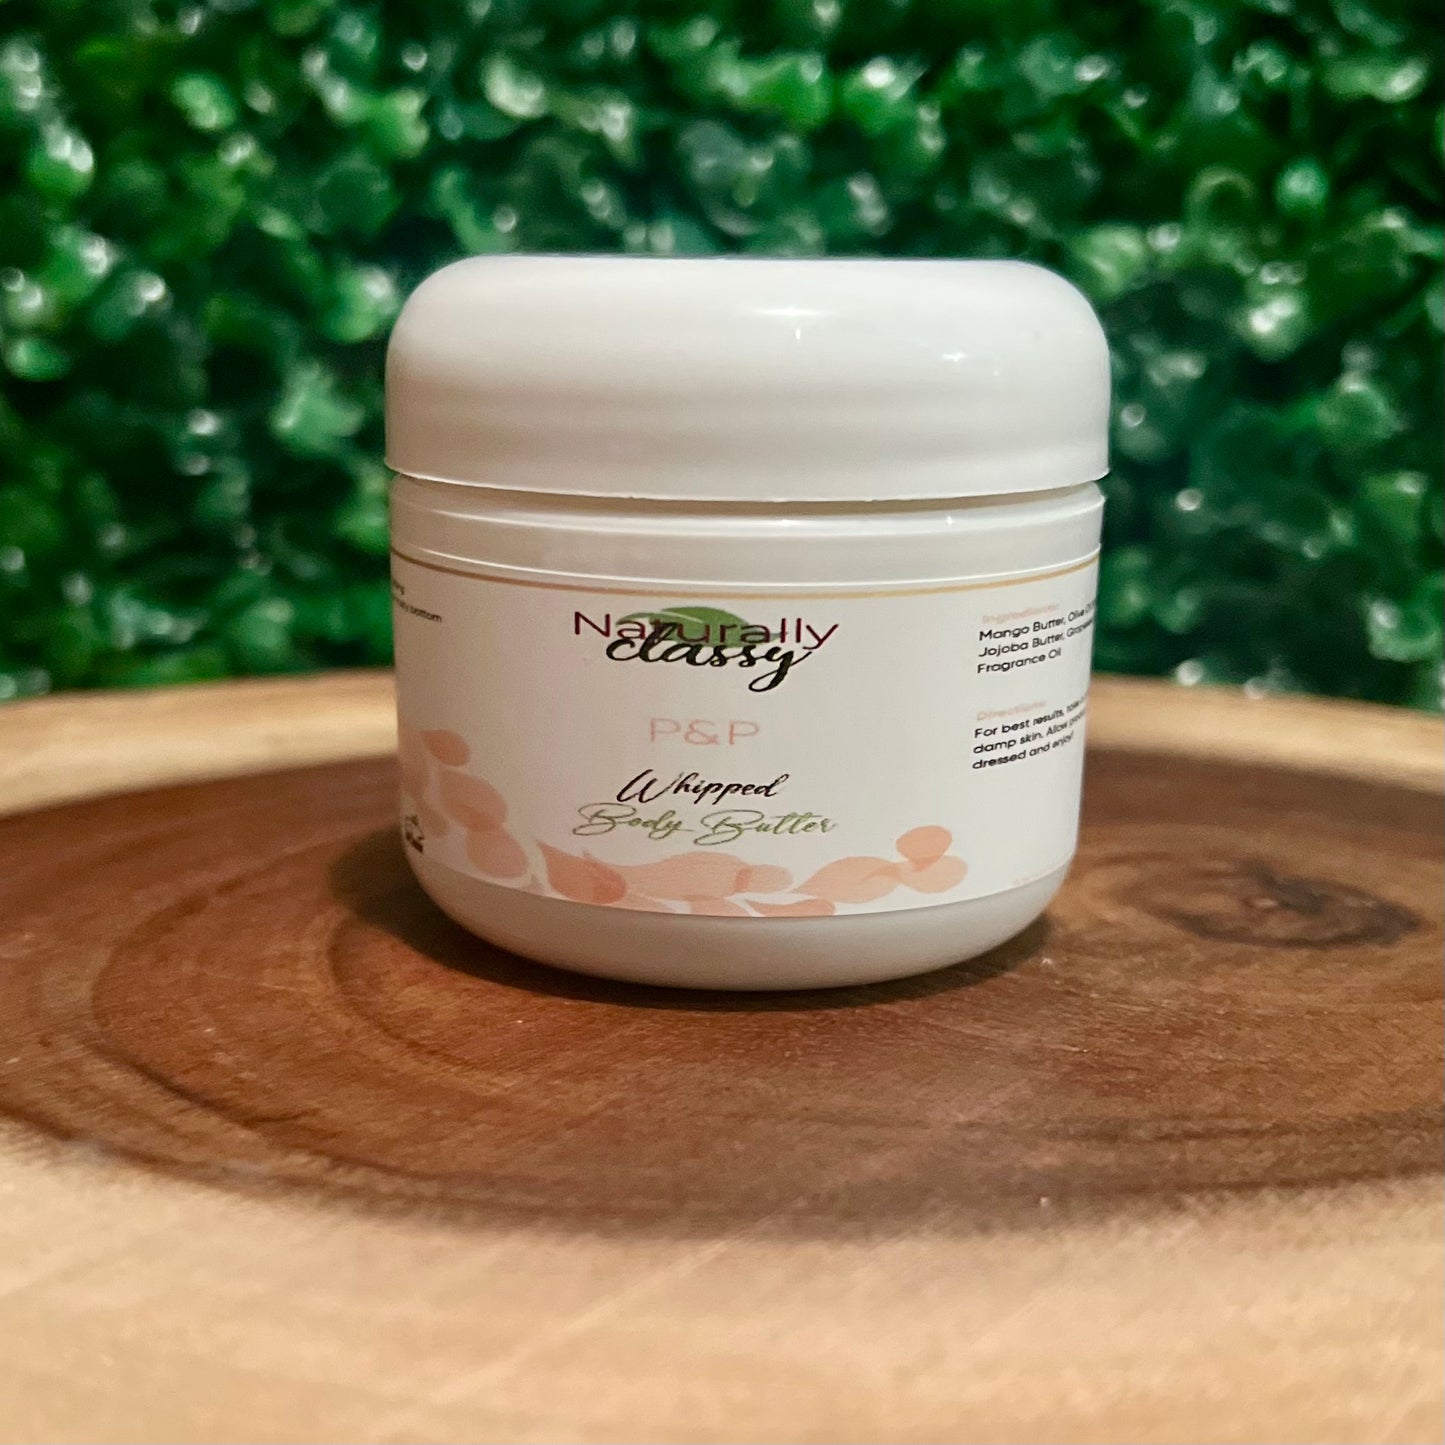 P & P Whipped Body Butter